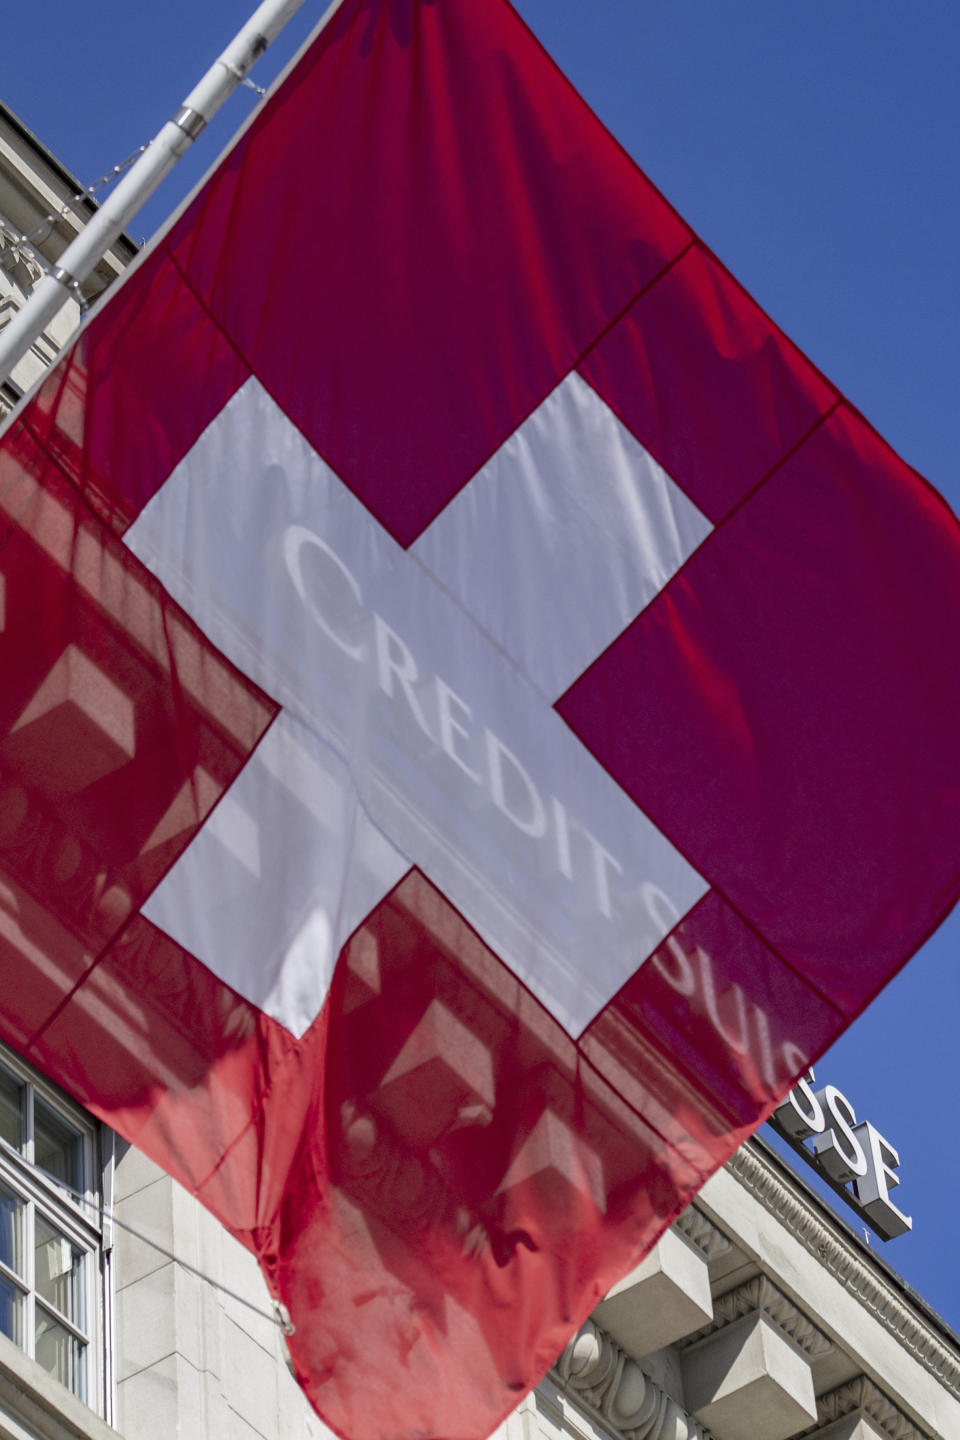 Switzerland's flag flutters in front of the Swiss bank Credit Suisse CS logo in Lucerne, Switzerland, Thursday March 16, 2023. Credit Suisse, which was beset by problems long before the U.S. bank failures, said Thursday that it would exercise an option to borrow up to 50 billion francs ($53.7 billion) from the Swiss National Bank. (Urs Flueeler/Keystone via AP)